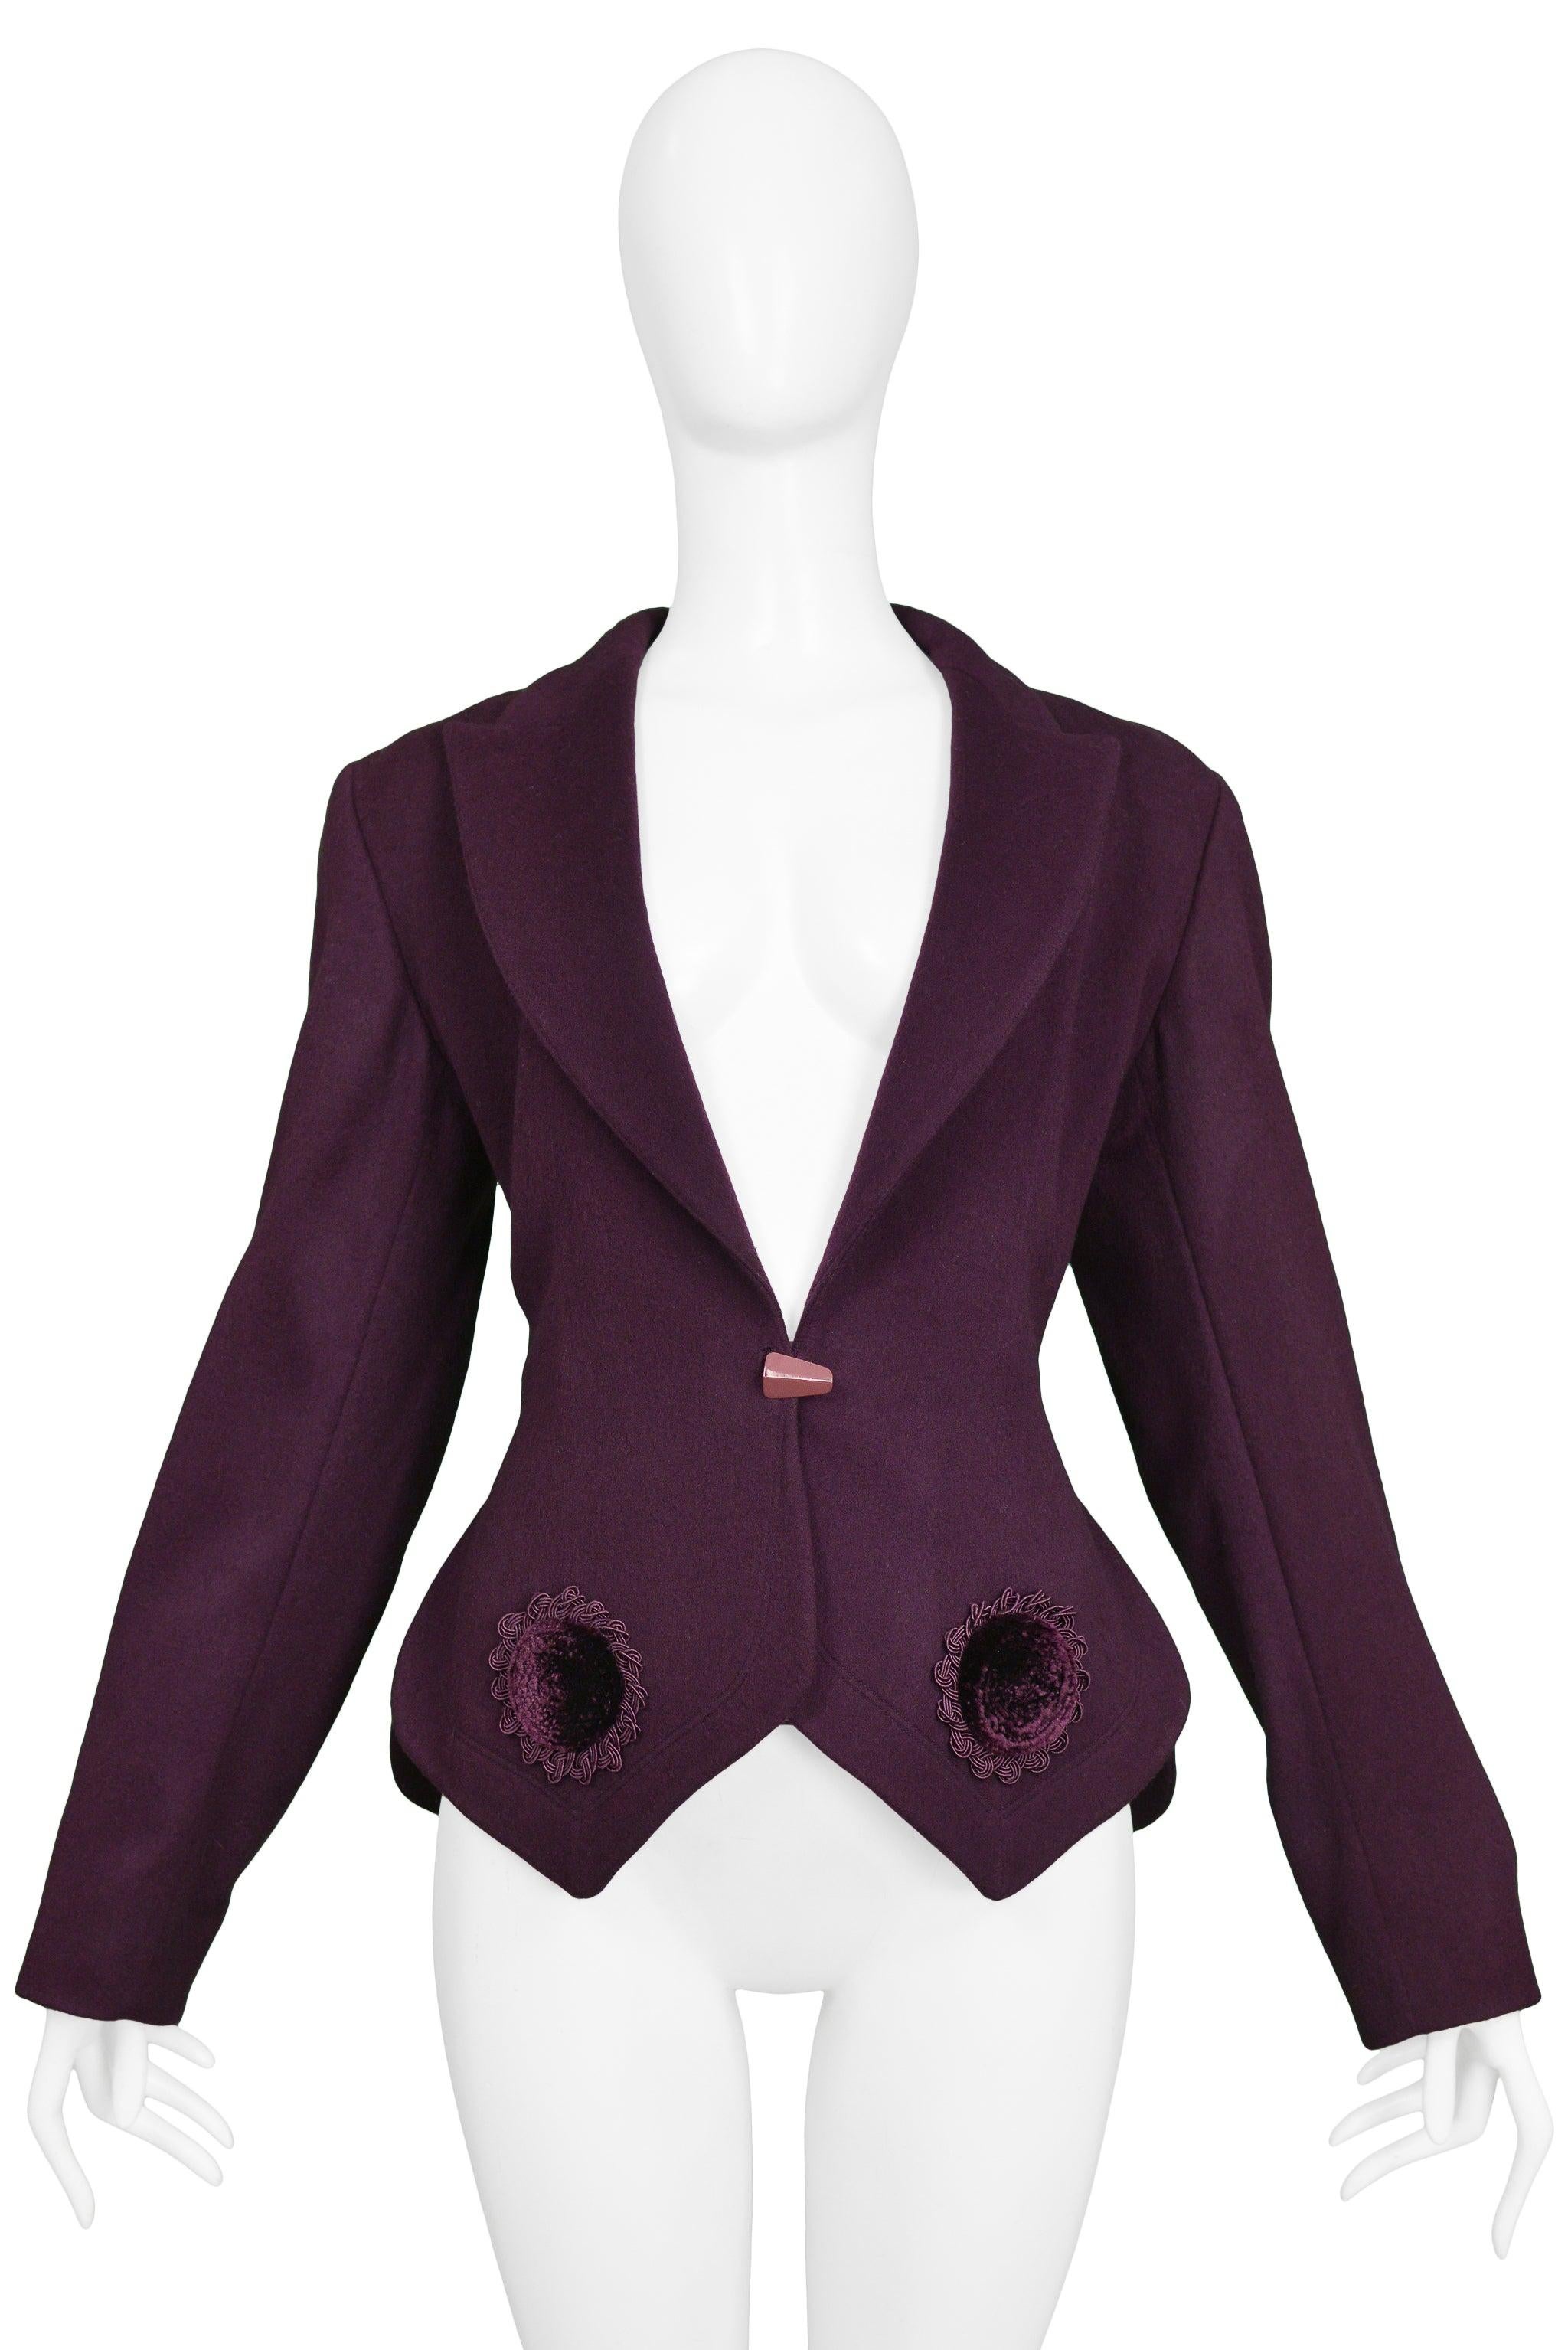 Resurrection Vintage is excited to offer a vintage black Azzedine Alaia wool fitted blazer featuring velvet appliques around the hemline, a classic lapel collar, straight sleeves, a tailored body, and black button closure.

Size 38
Measurements: